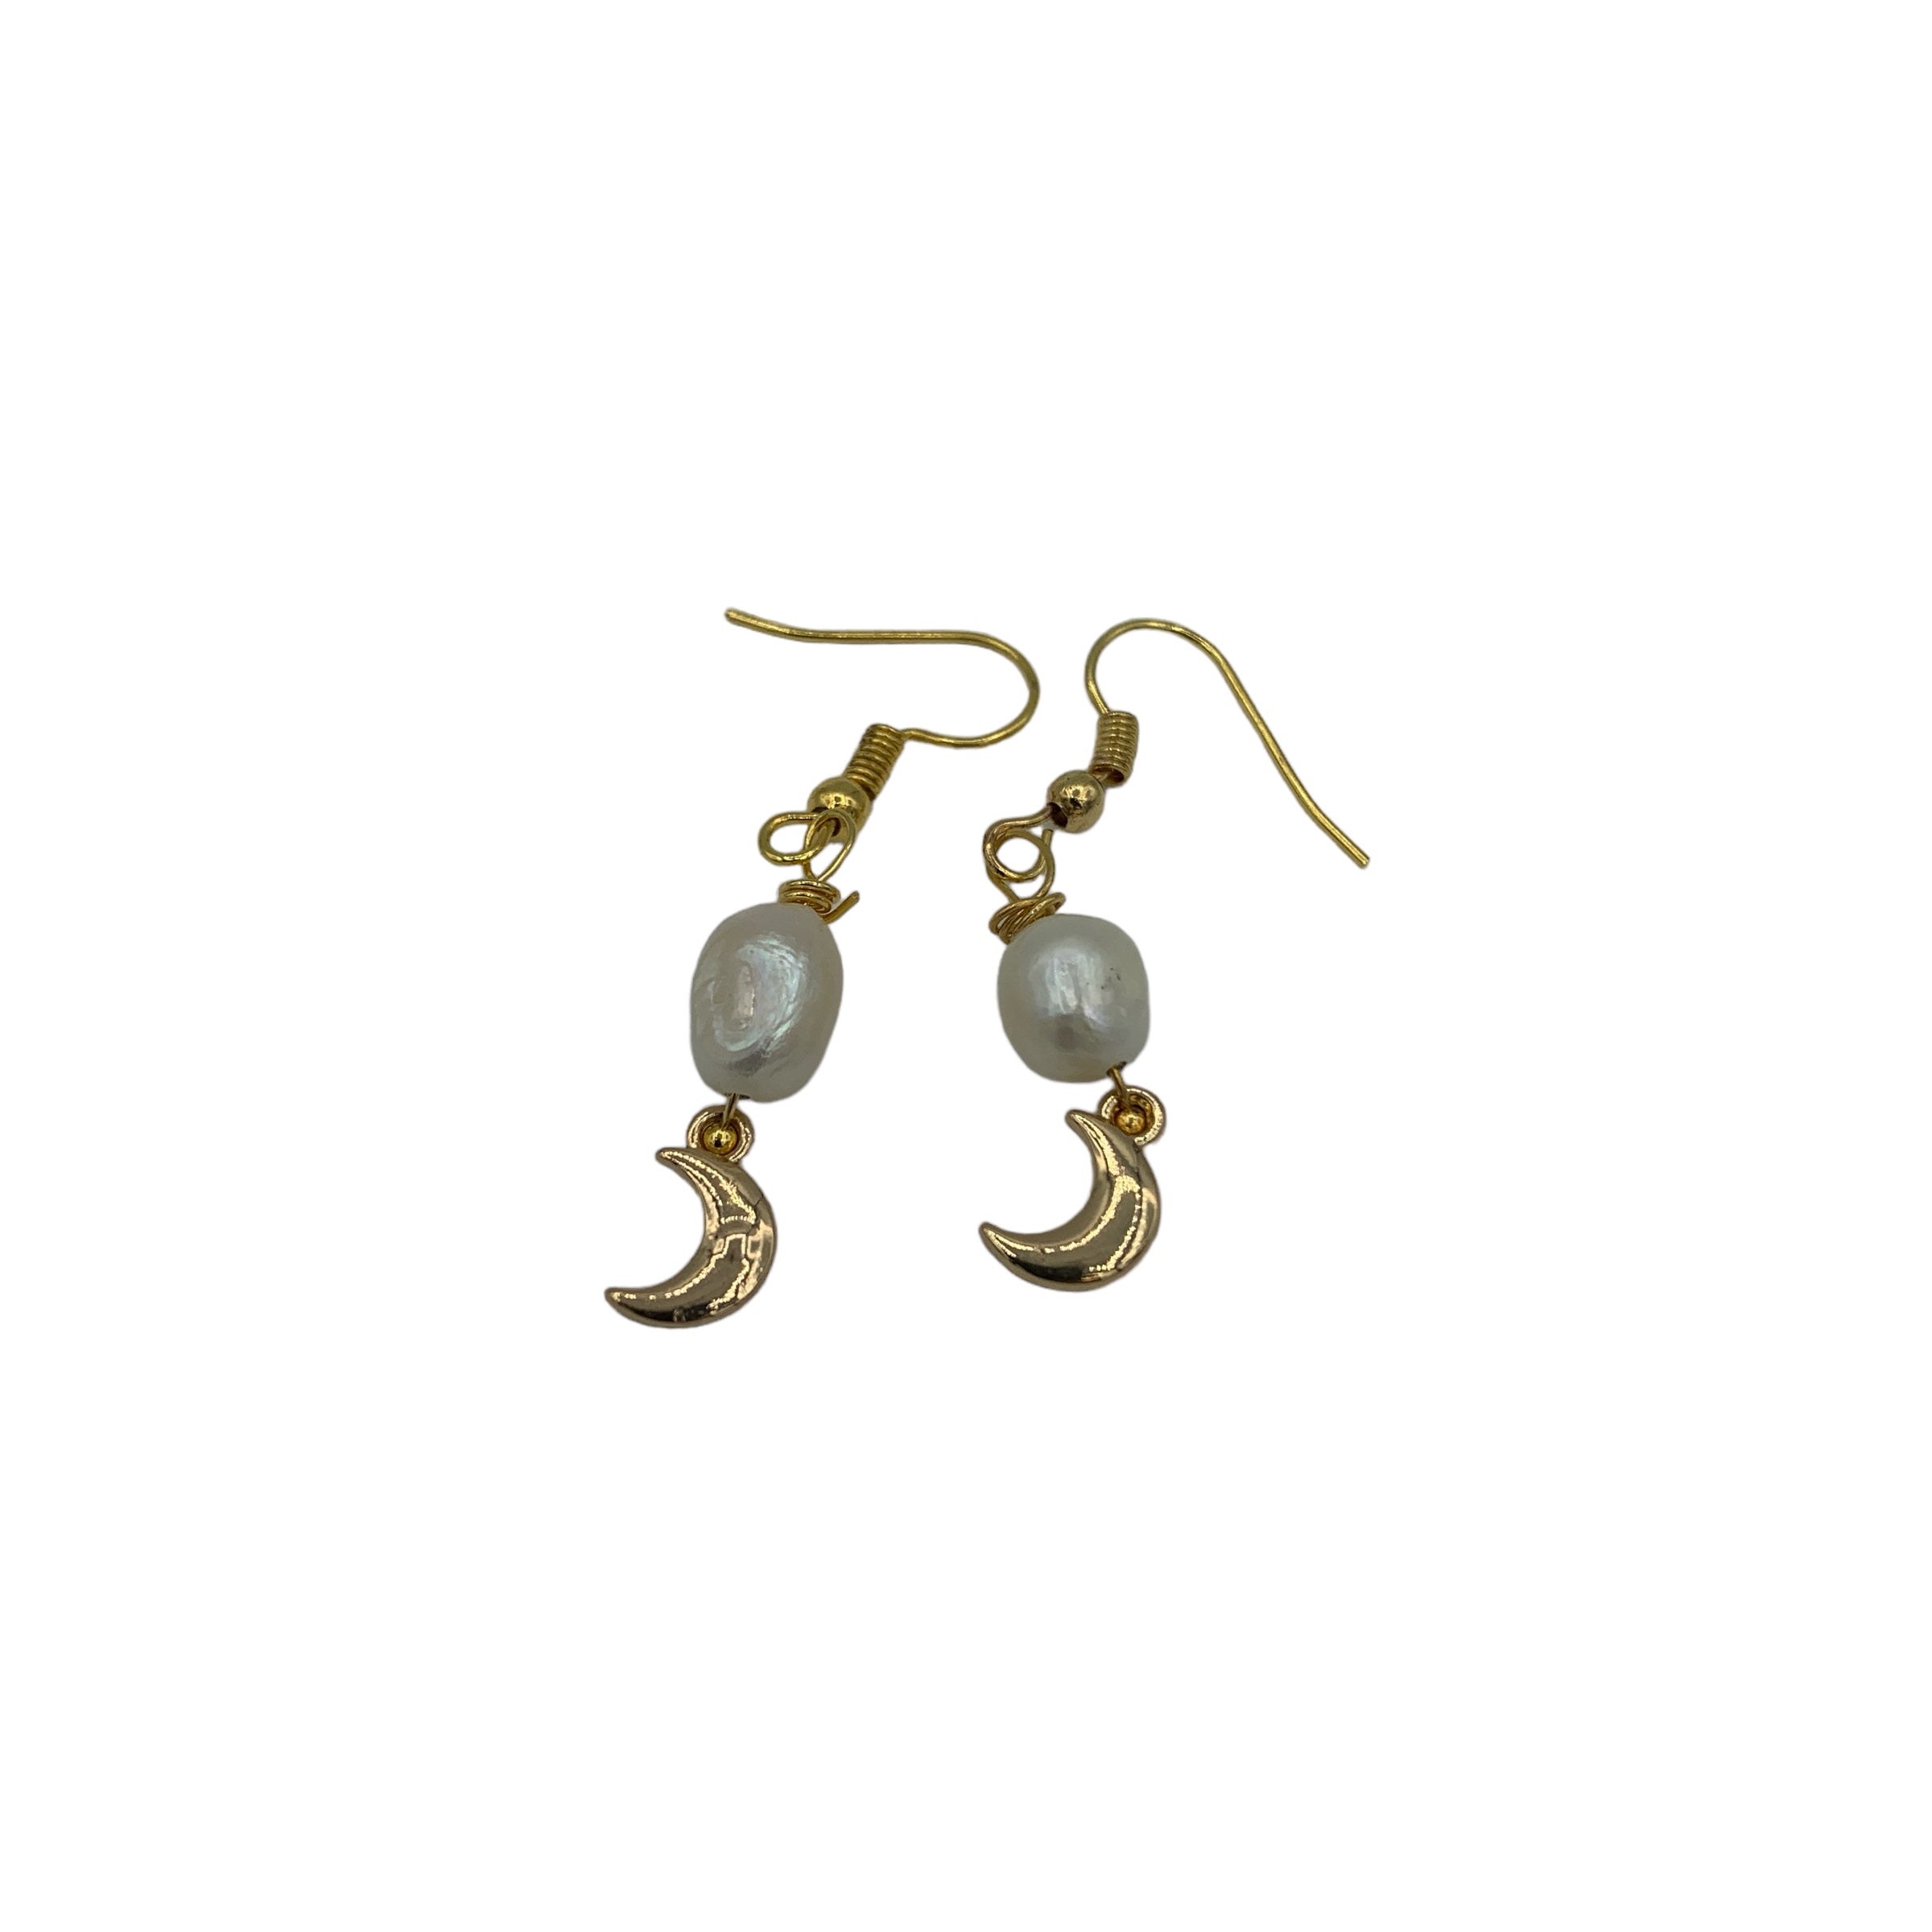 Earrings - Pearl Drop with Crescent Moon Charm $20